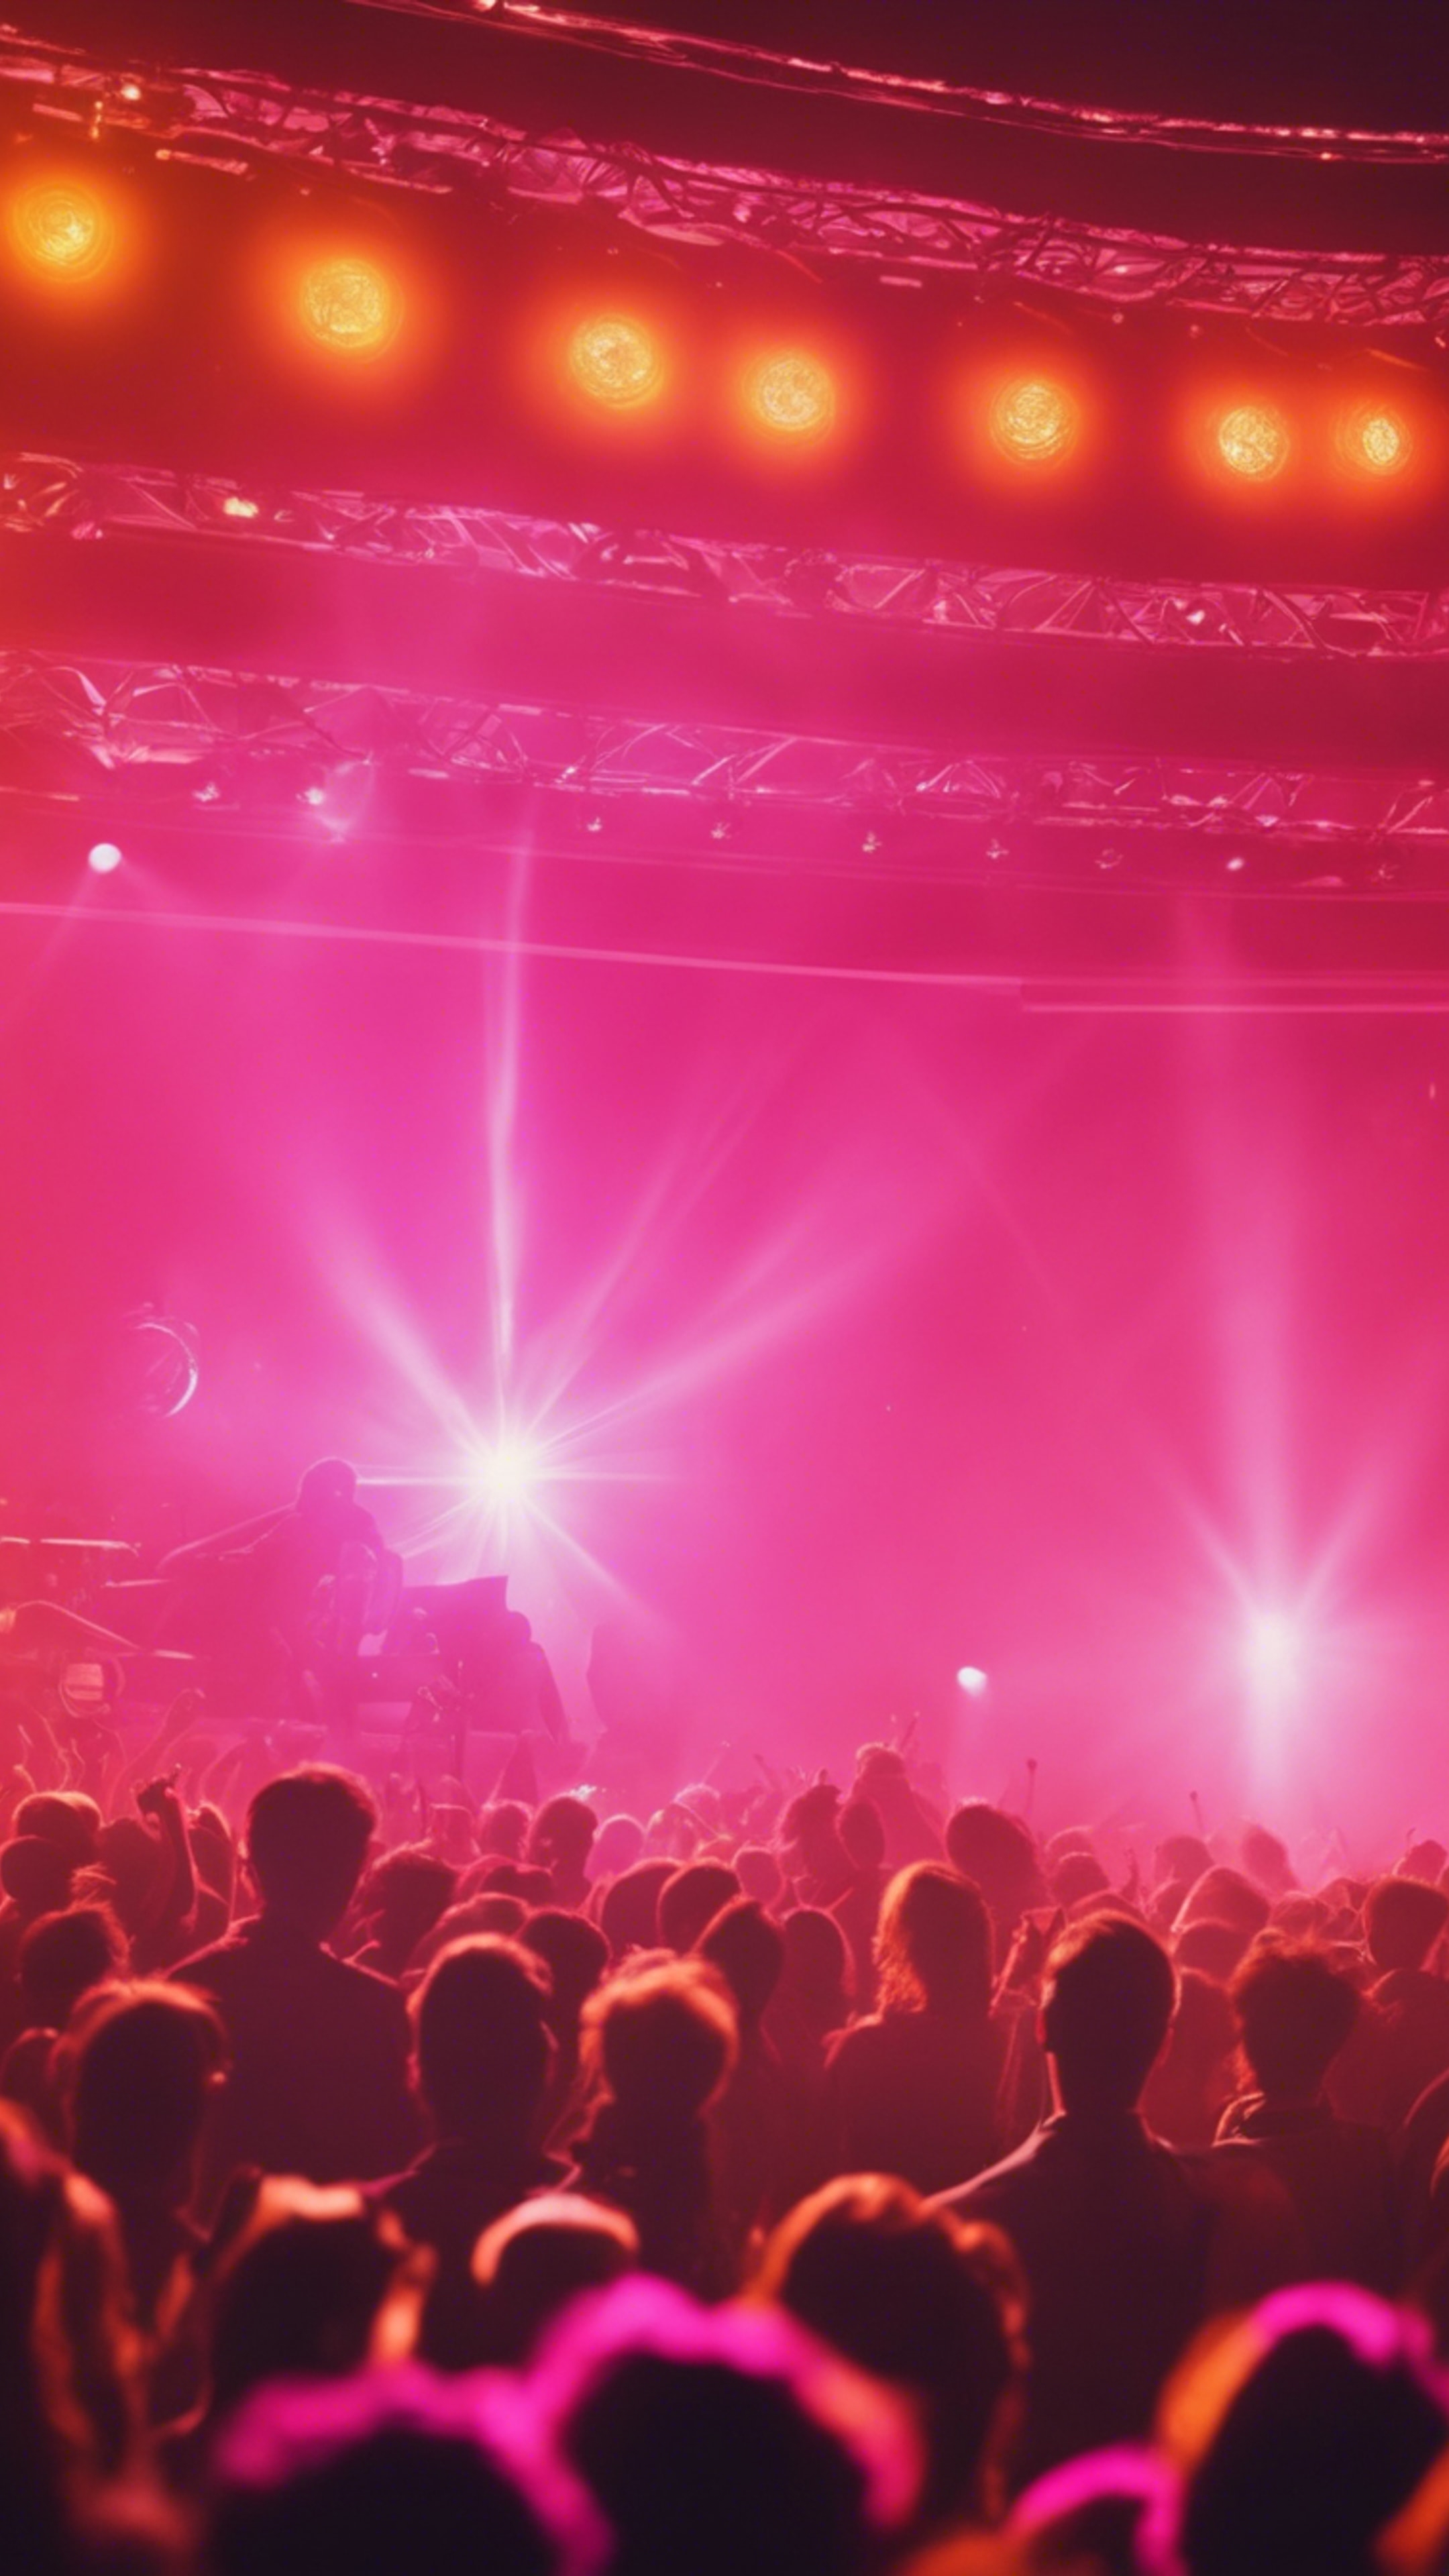 Bright orange flares from an 80s music concert with a pink stage lighting. Обои[6011018ba8cb439fb9ea]